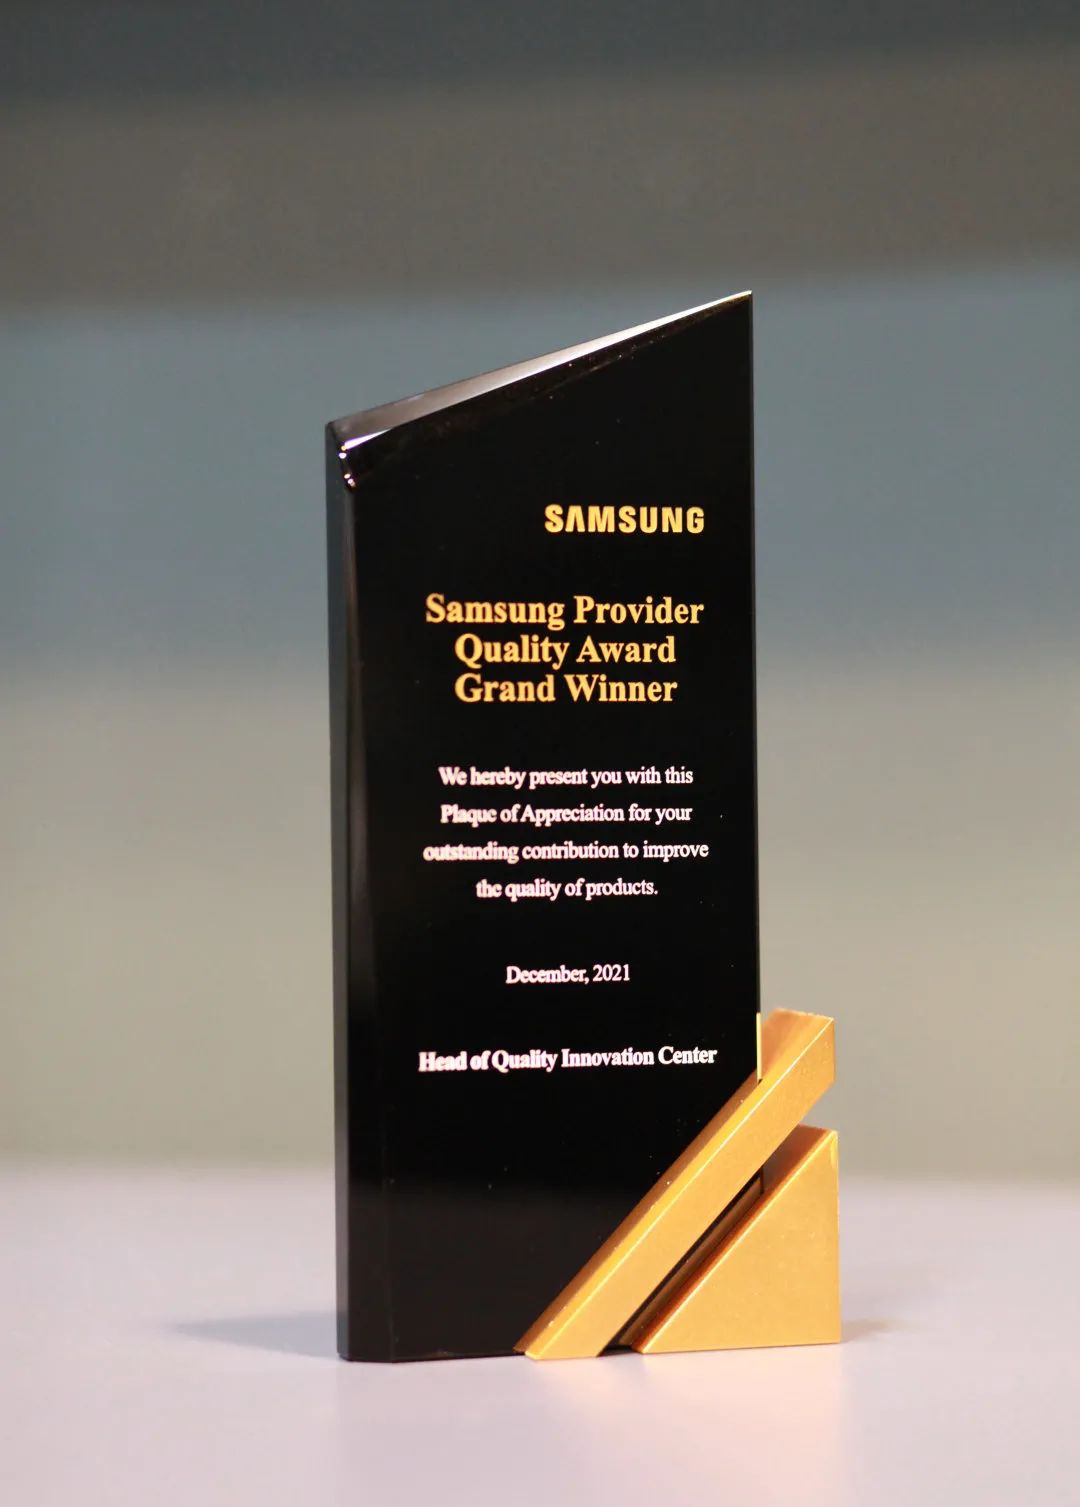 Huaqin Became the First Samsung Provider Quality Award Grand Winner